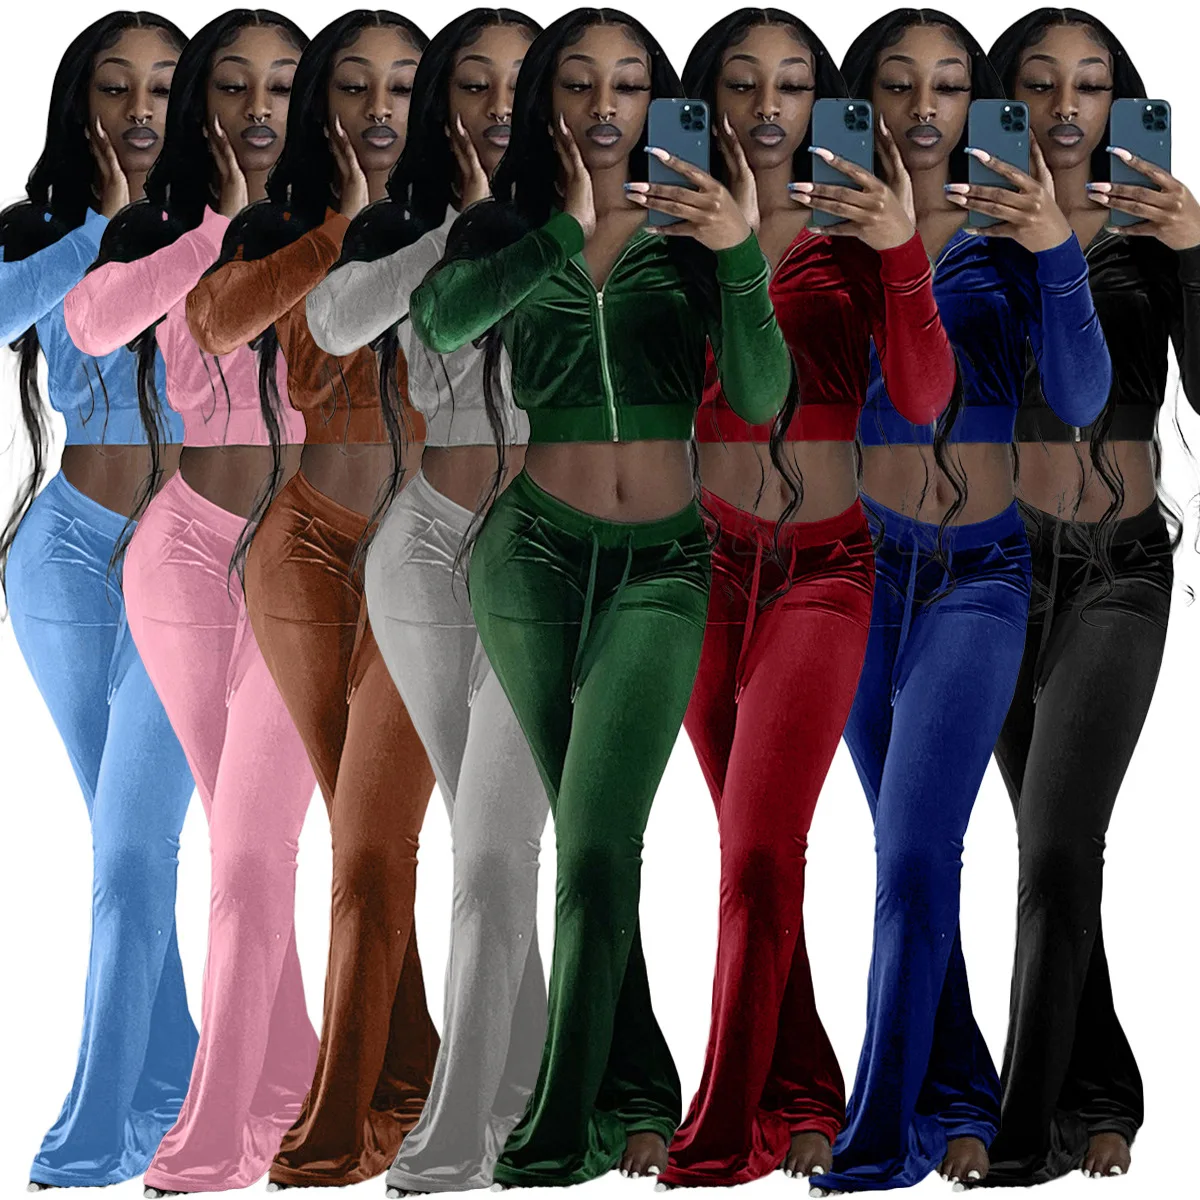 2021 Fall women clothing velour tracksuit long sleeves hoodie sweatsuit crop top 2 piece pants set outfit  velvet two piece set